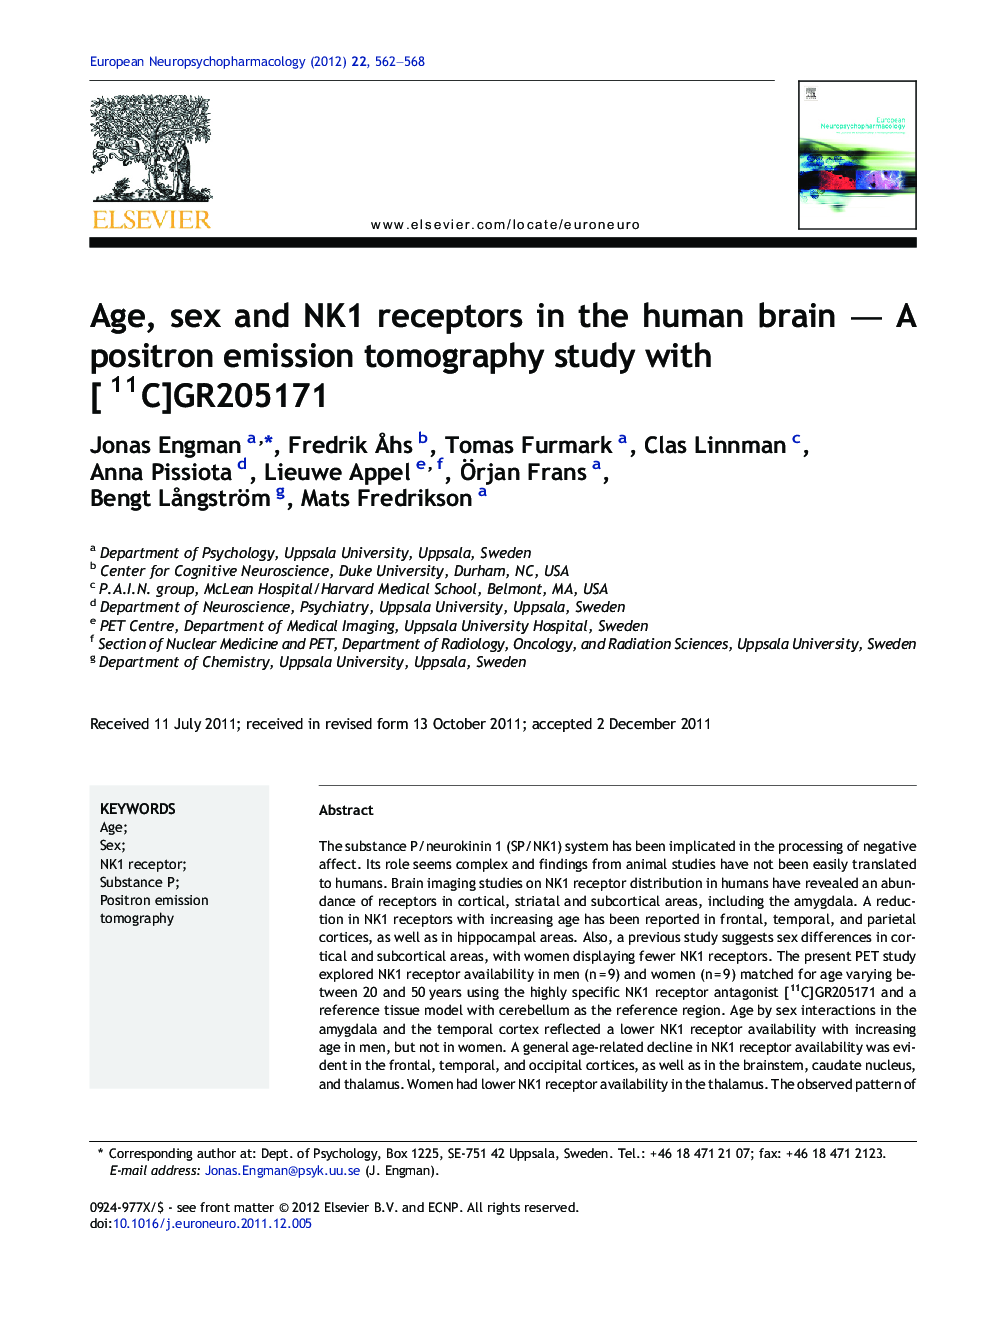 Age, sex and NK1 receptors in the human brain - A positron emission tomography study with [11C]GR205171